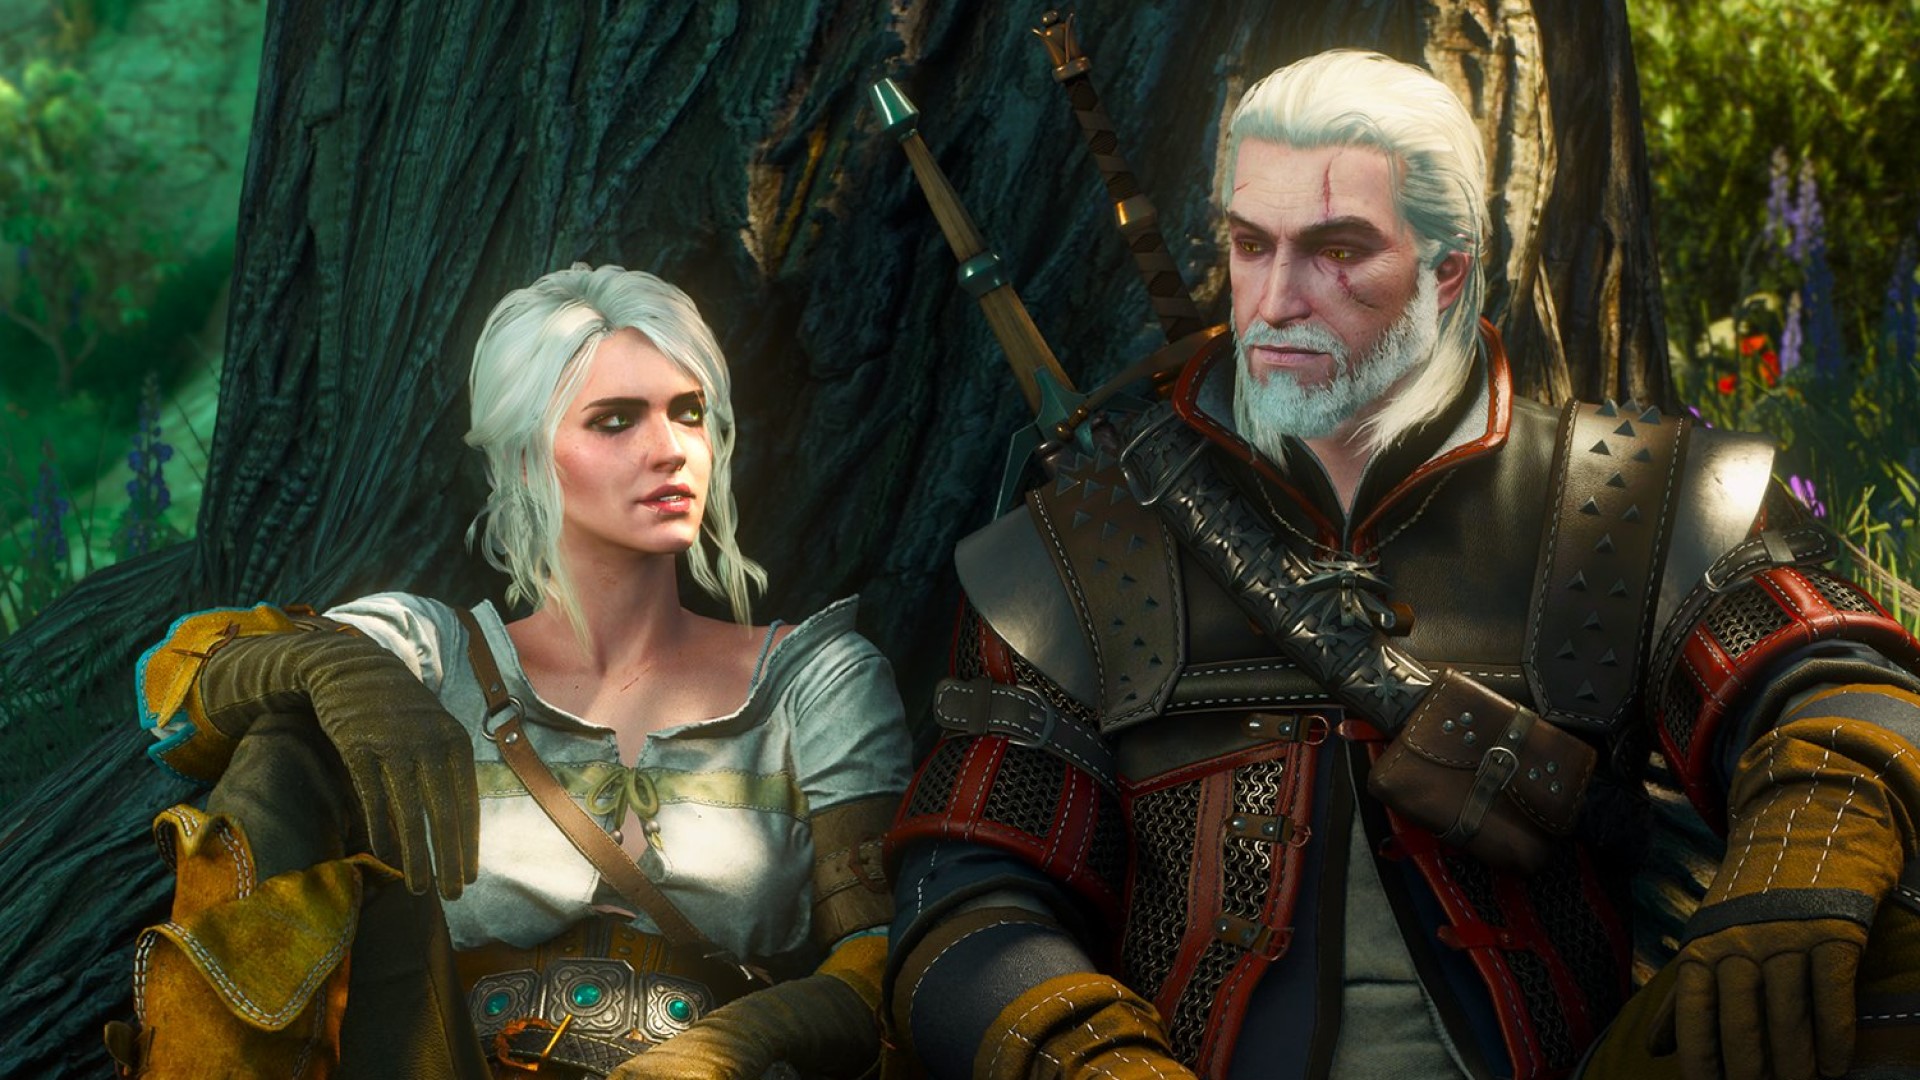 After playing hundreds of hours of The Witcher 3 since 2015, I can’t believe I’d never heard of this mod that squashes 5,400+ bugs and restores cut dialogue